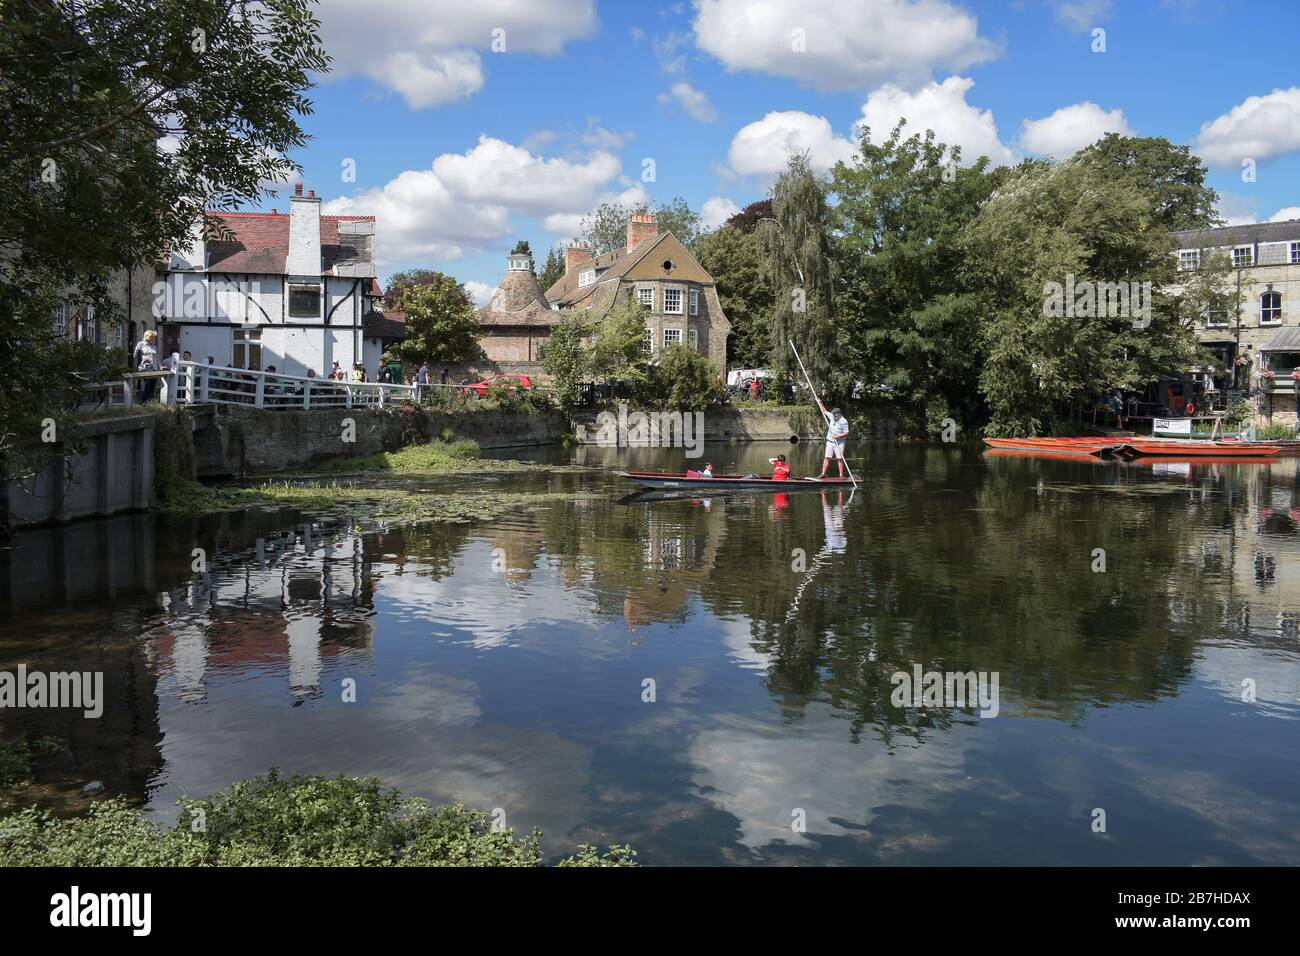 Cambridge, Cambridgeshire, United Kingdom - Tourists on punt trip (sightseeing with boat) along River Cam in the city of Cambridge, Unite Stock Photo